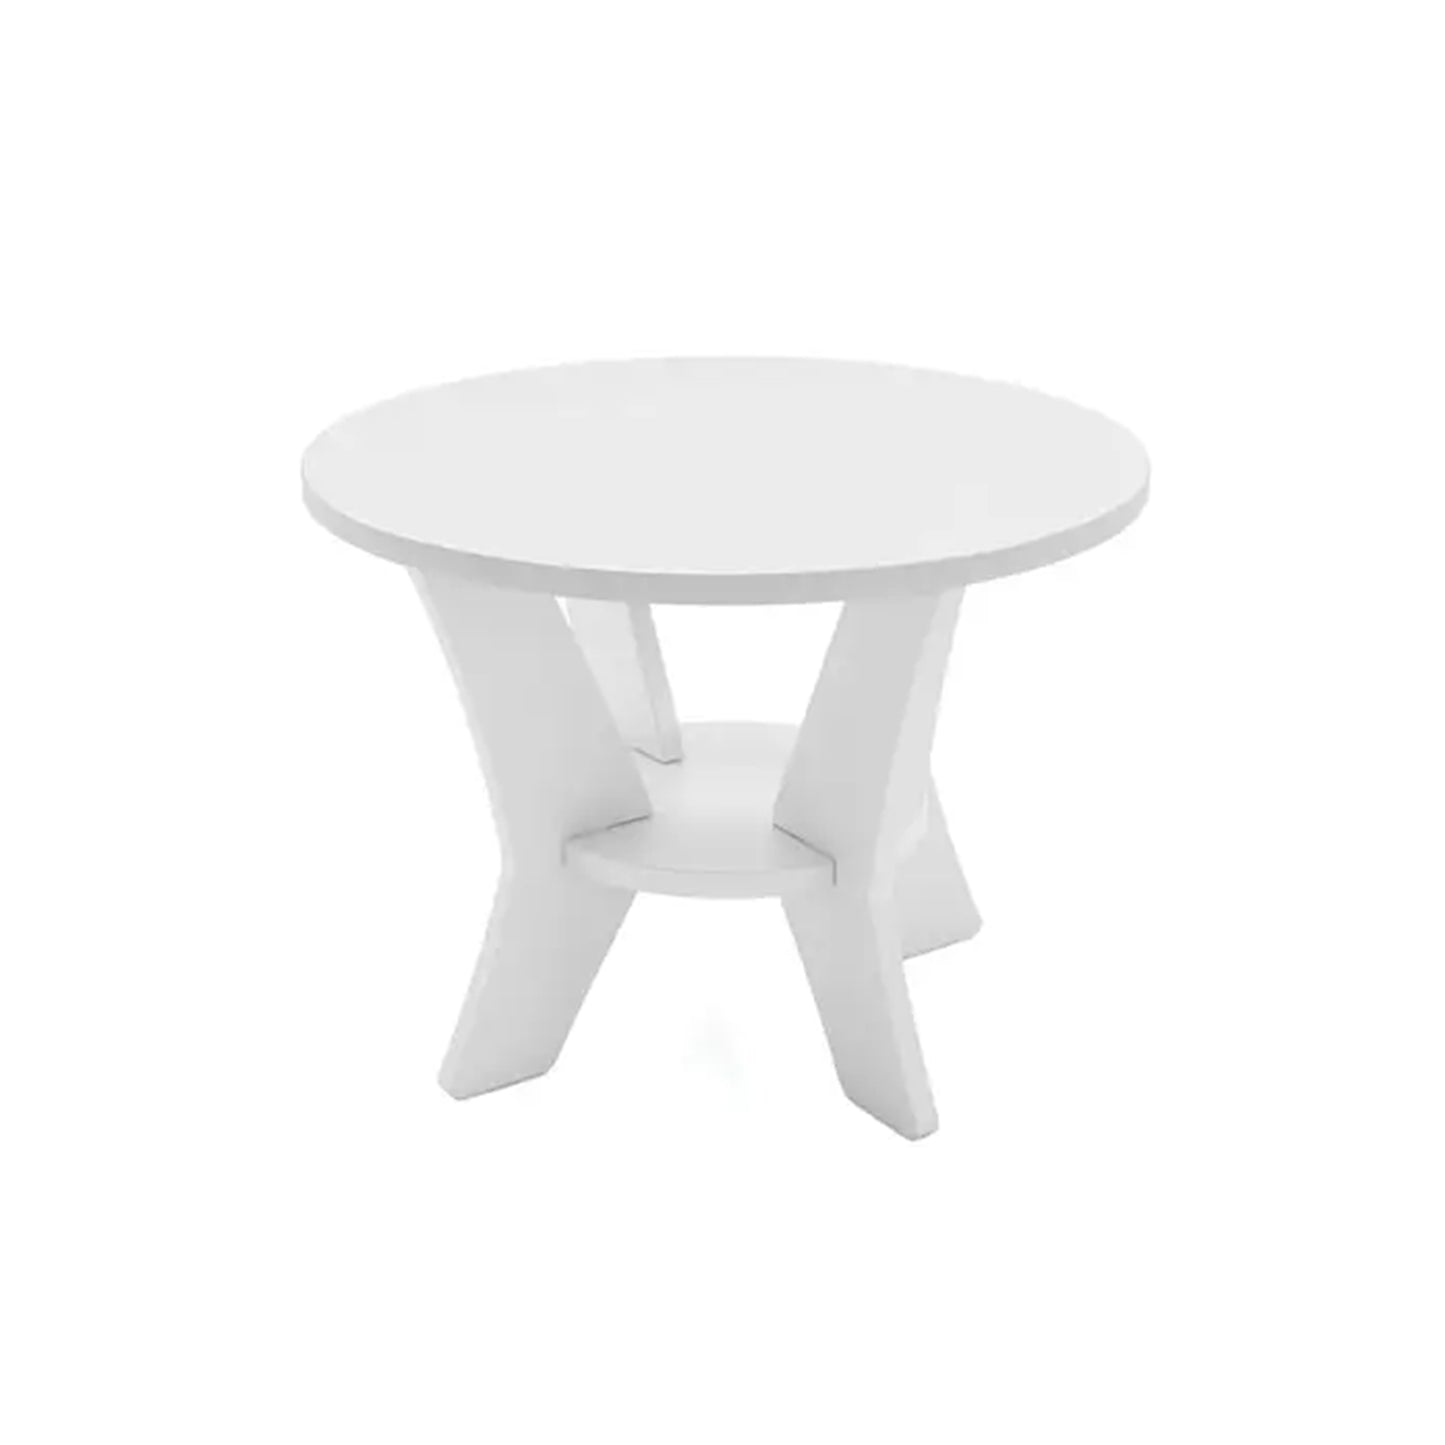 Ledge Lounger Mainstay Round Side Table